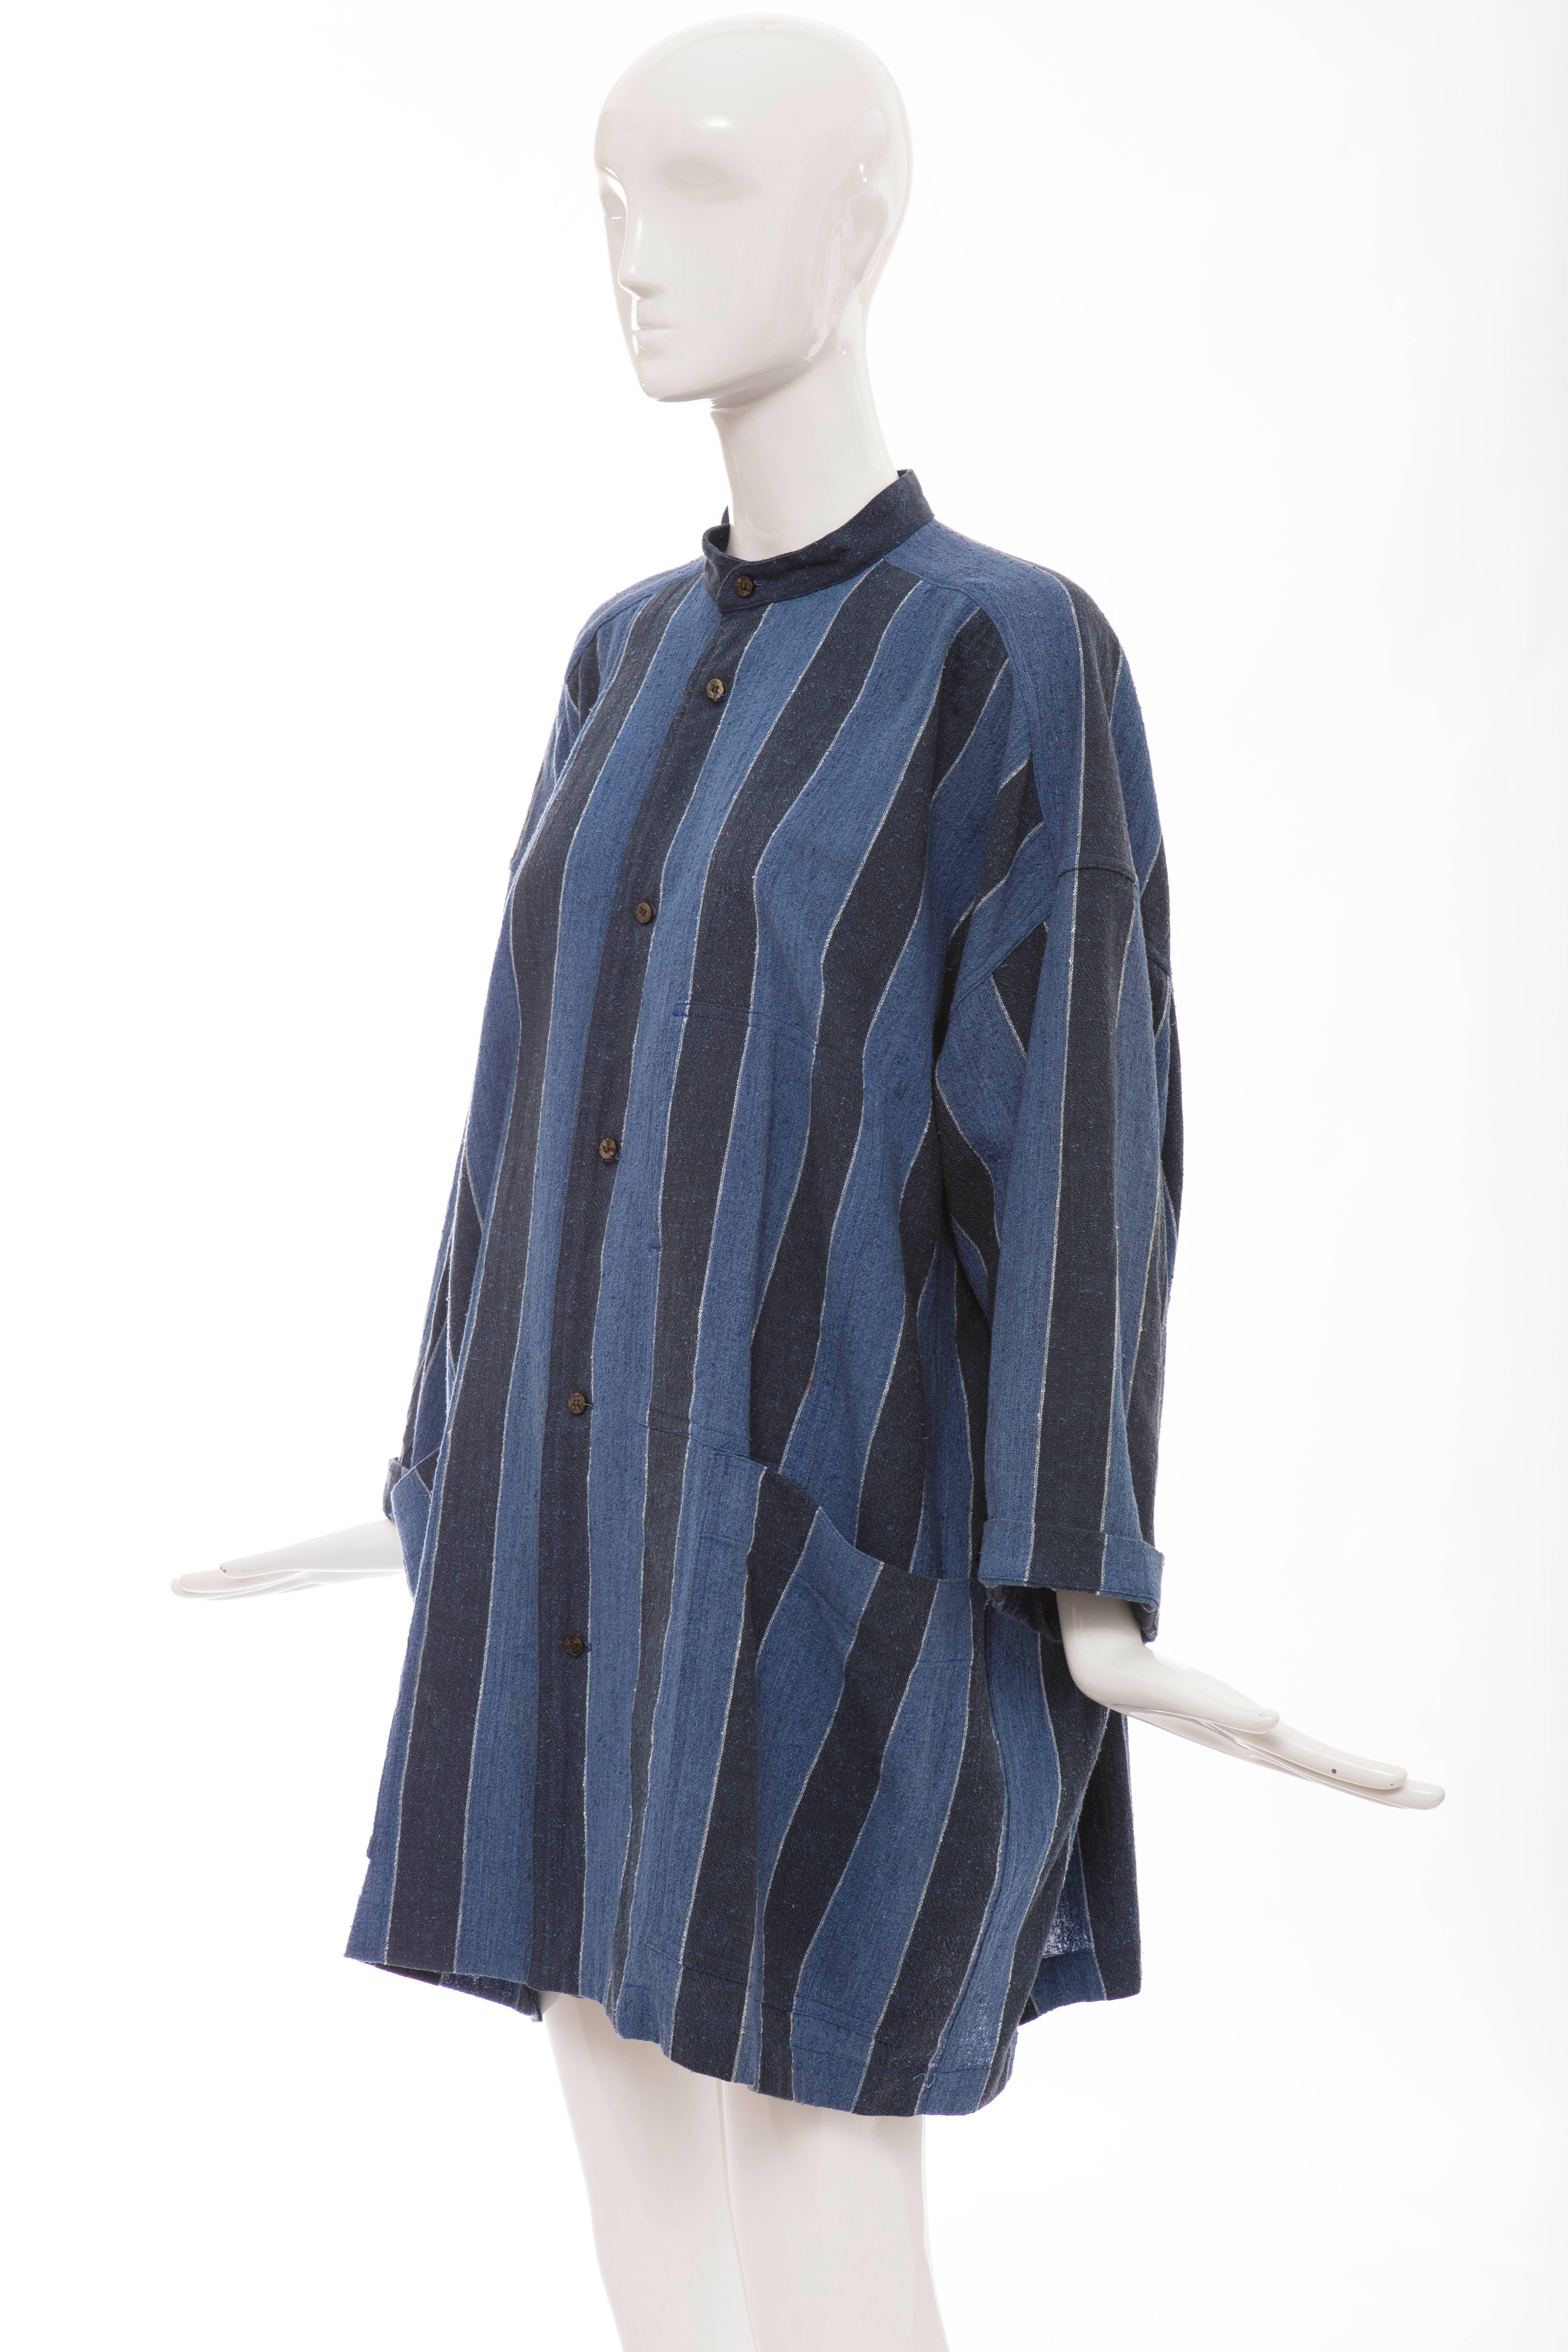 Issey Miyake Plantation Woven Cotton Button Front Shirt, Circa: 1980's For Sale 3